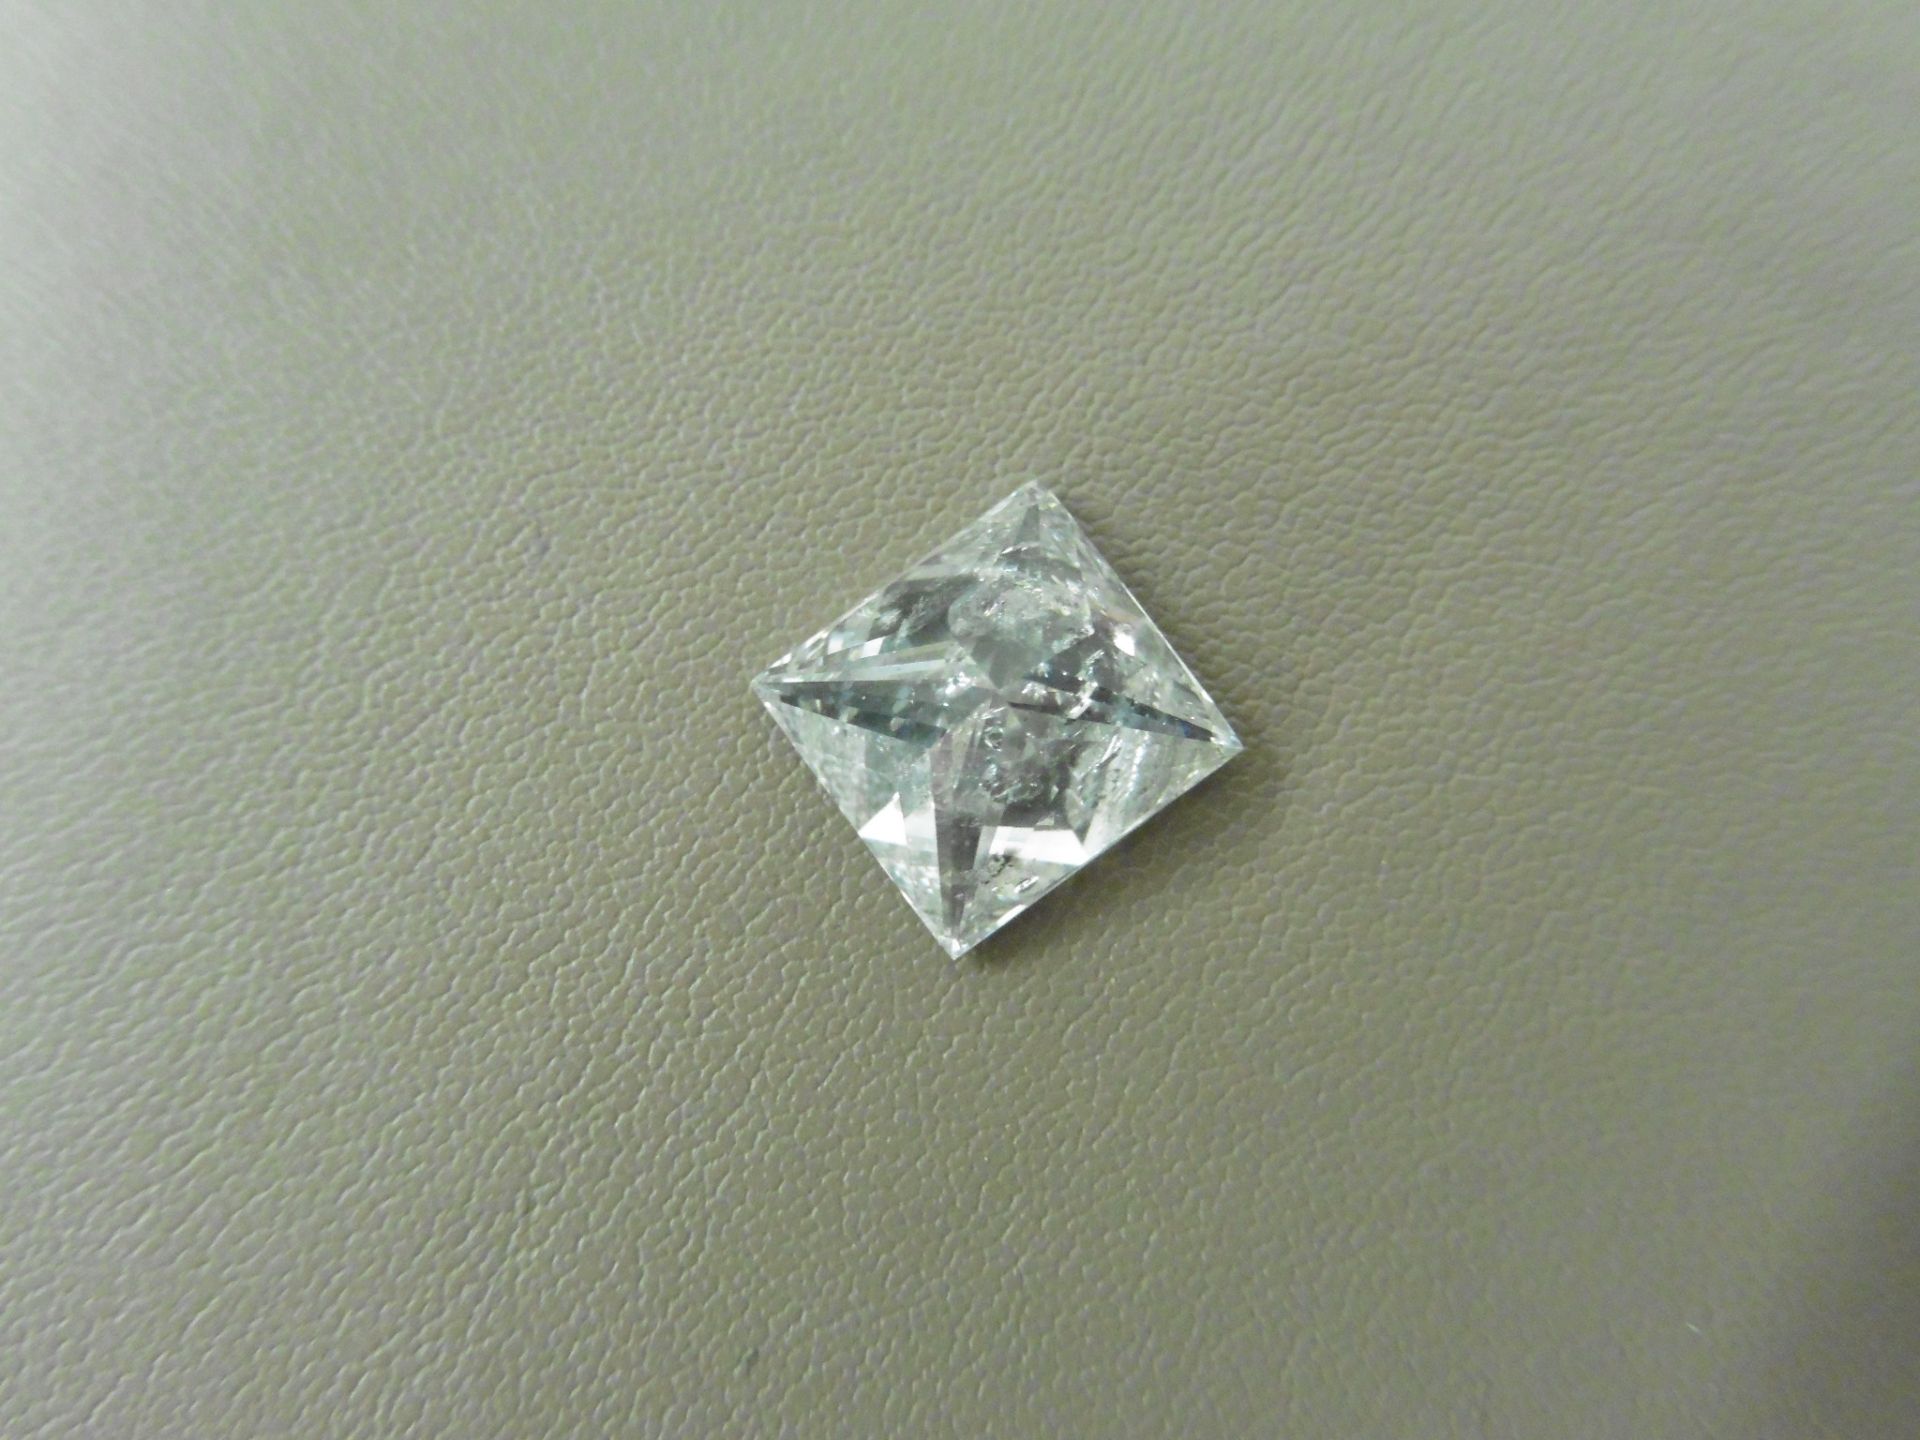 3.99ct natural loose princess cut diamond. F colour and I1clarity. EGL certification. Valued at £ - Image 5 of 5